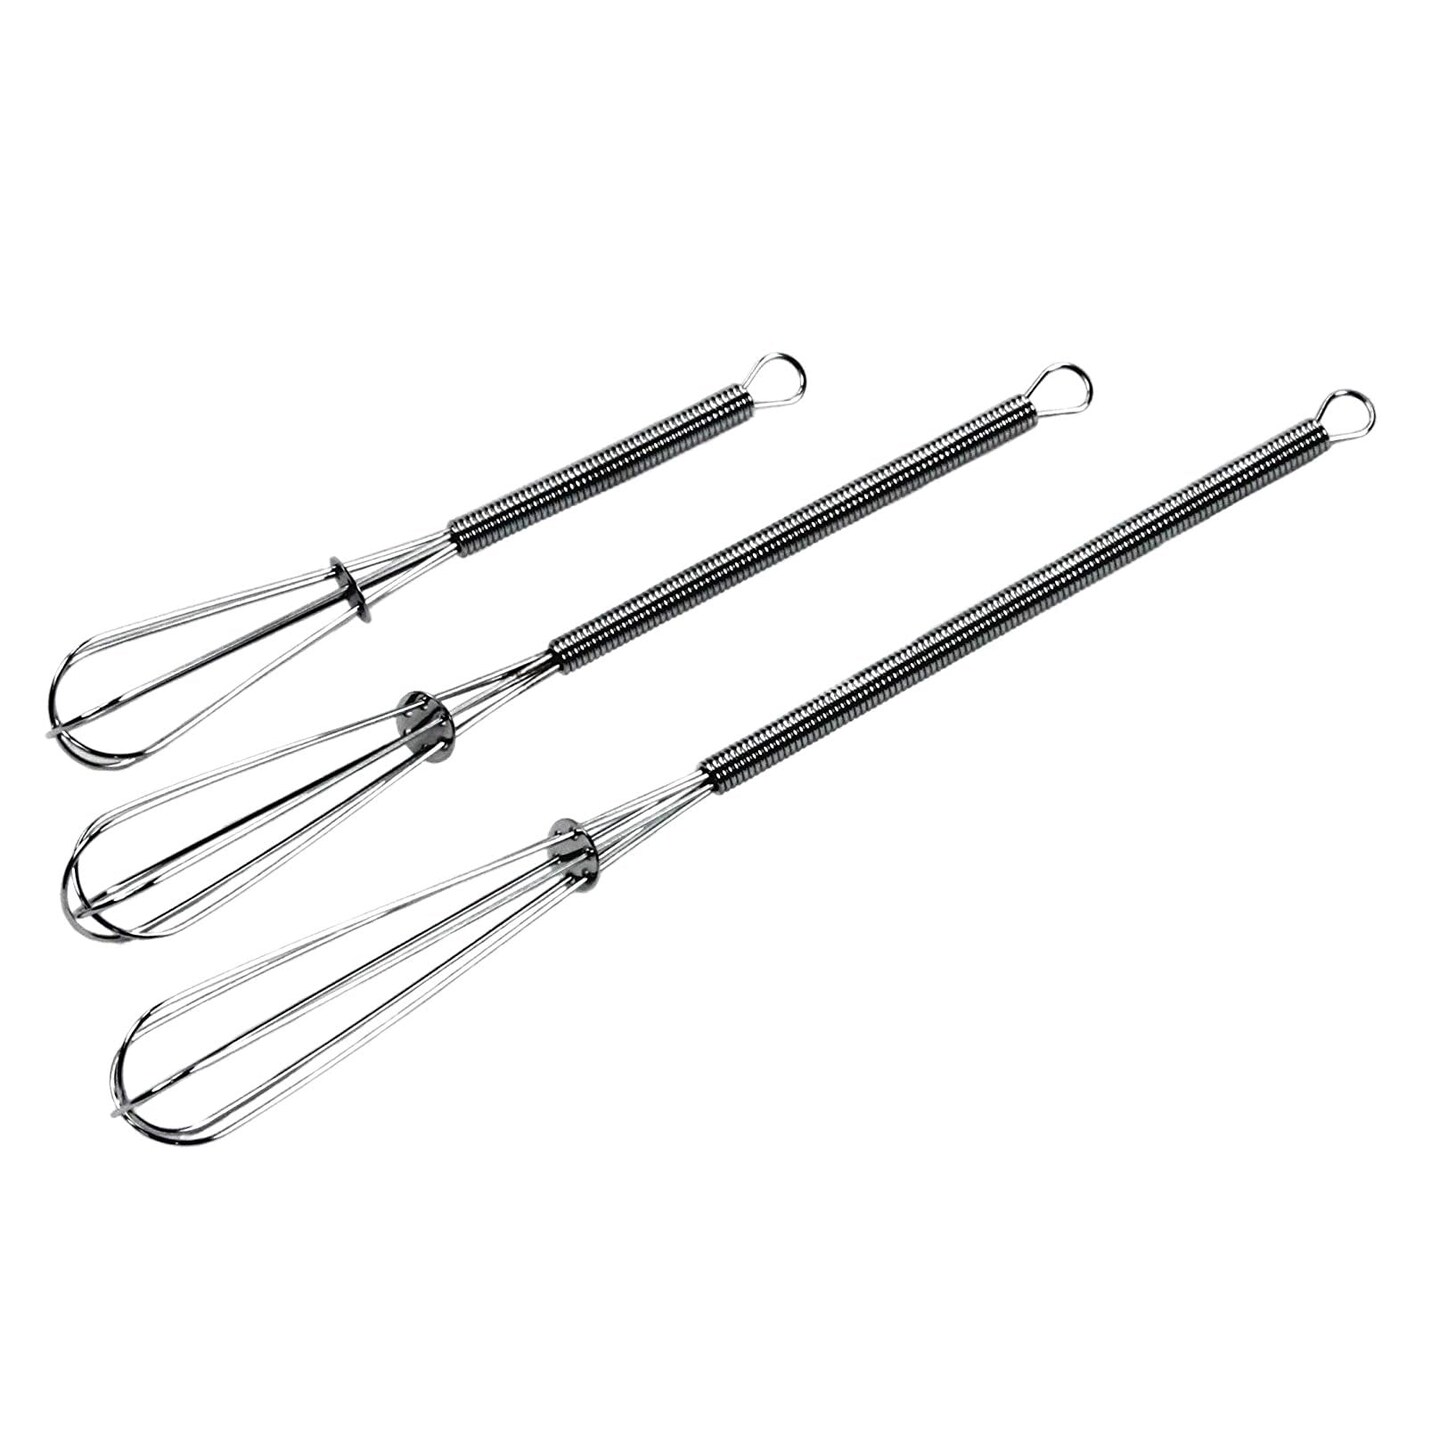 Stainless Steel Whisk, Large And Mini Whisk